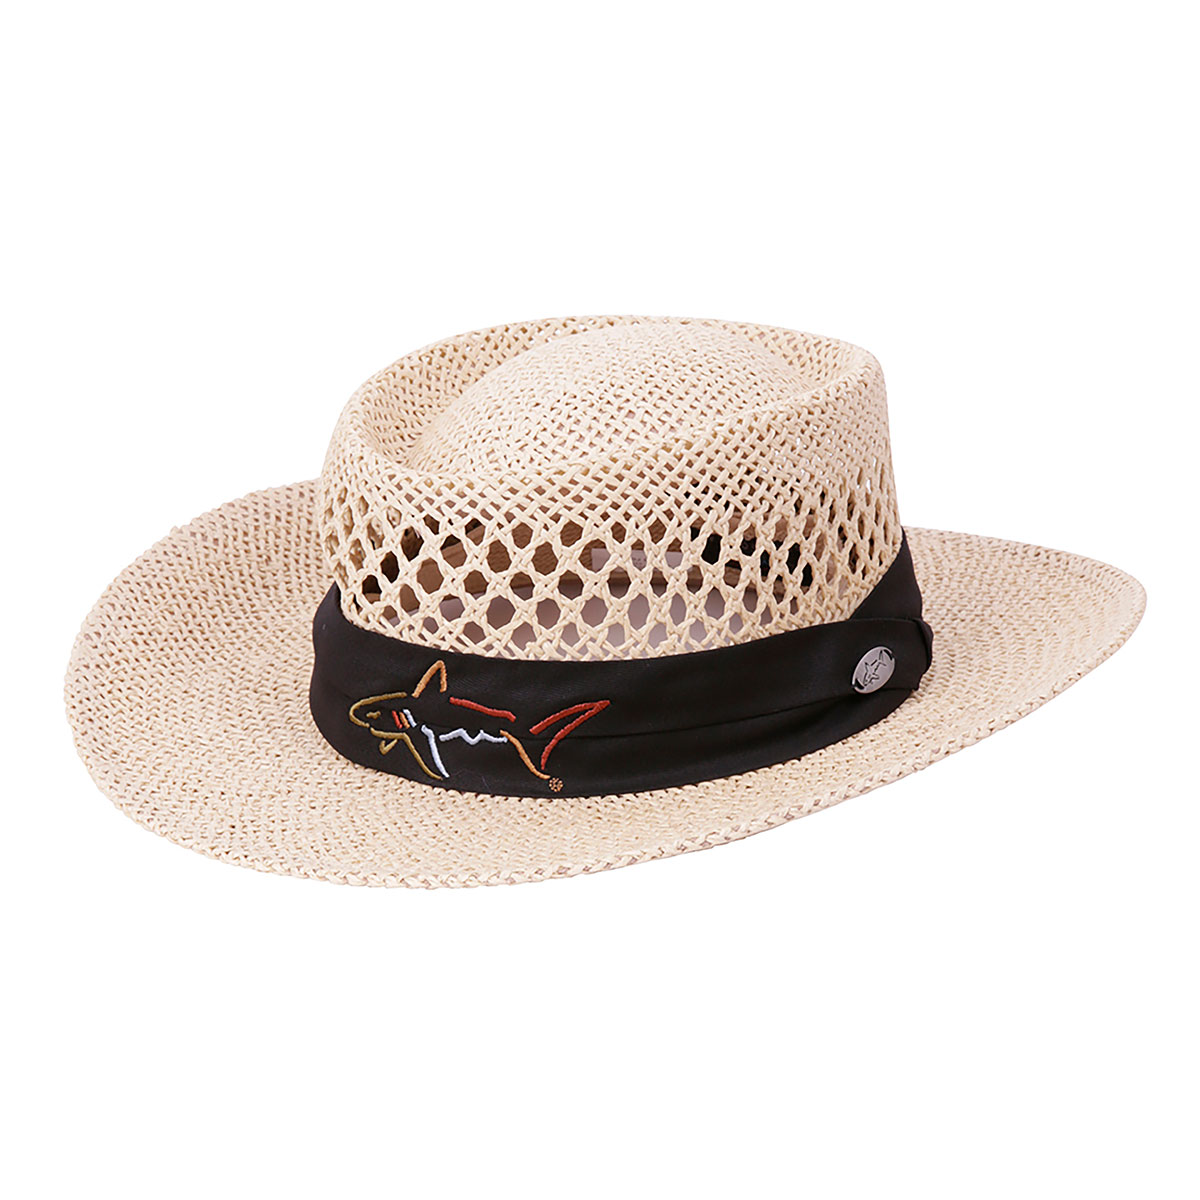 Greg Norman Straw Hat from american golf